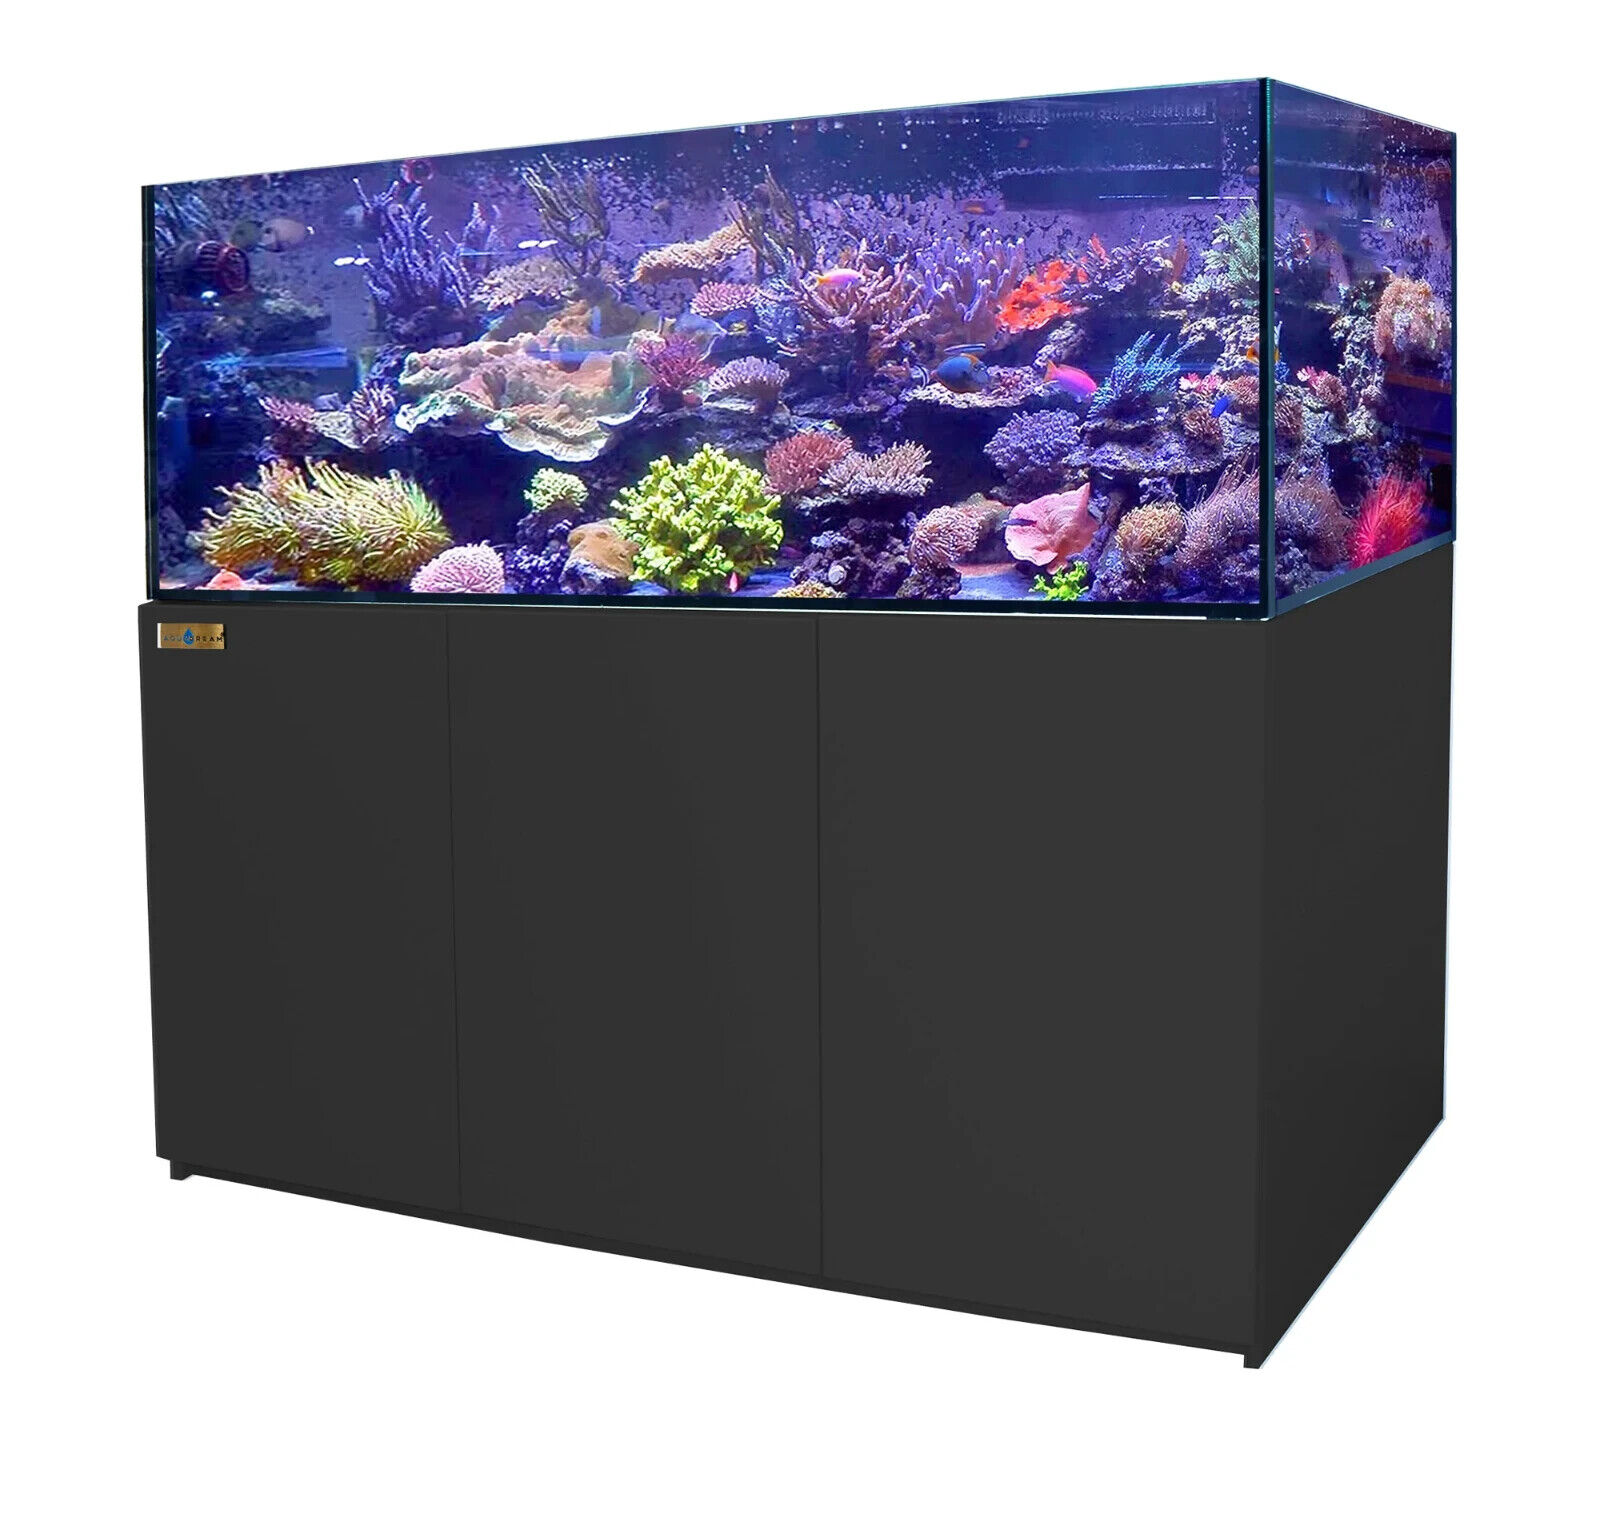 Coral Reef Aquarium 250 Gallon Ultra Clear Glass and Built-in Sump Fish Tank